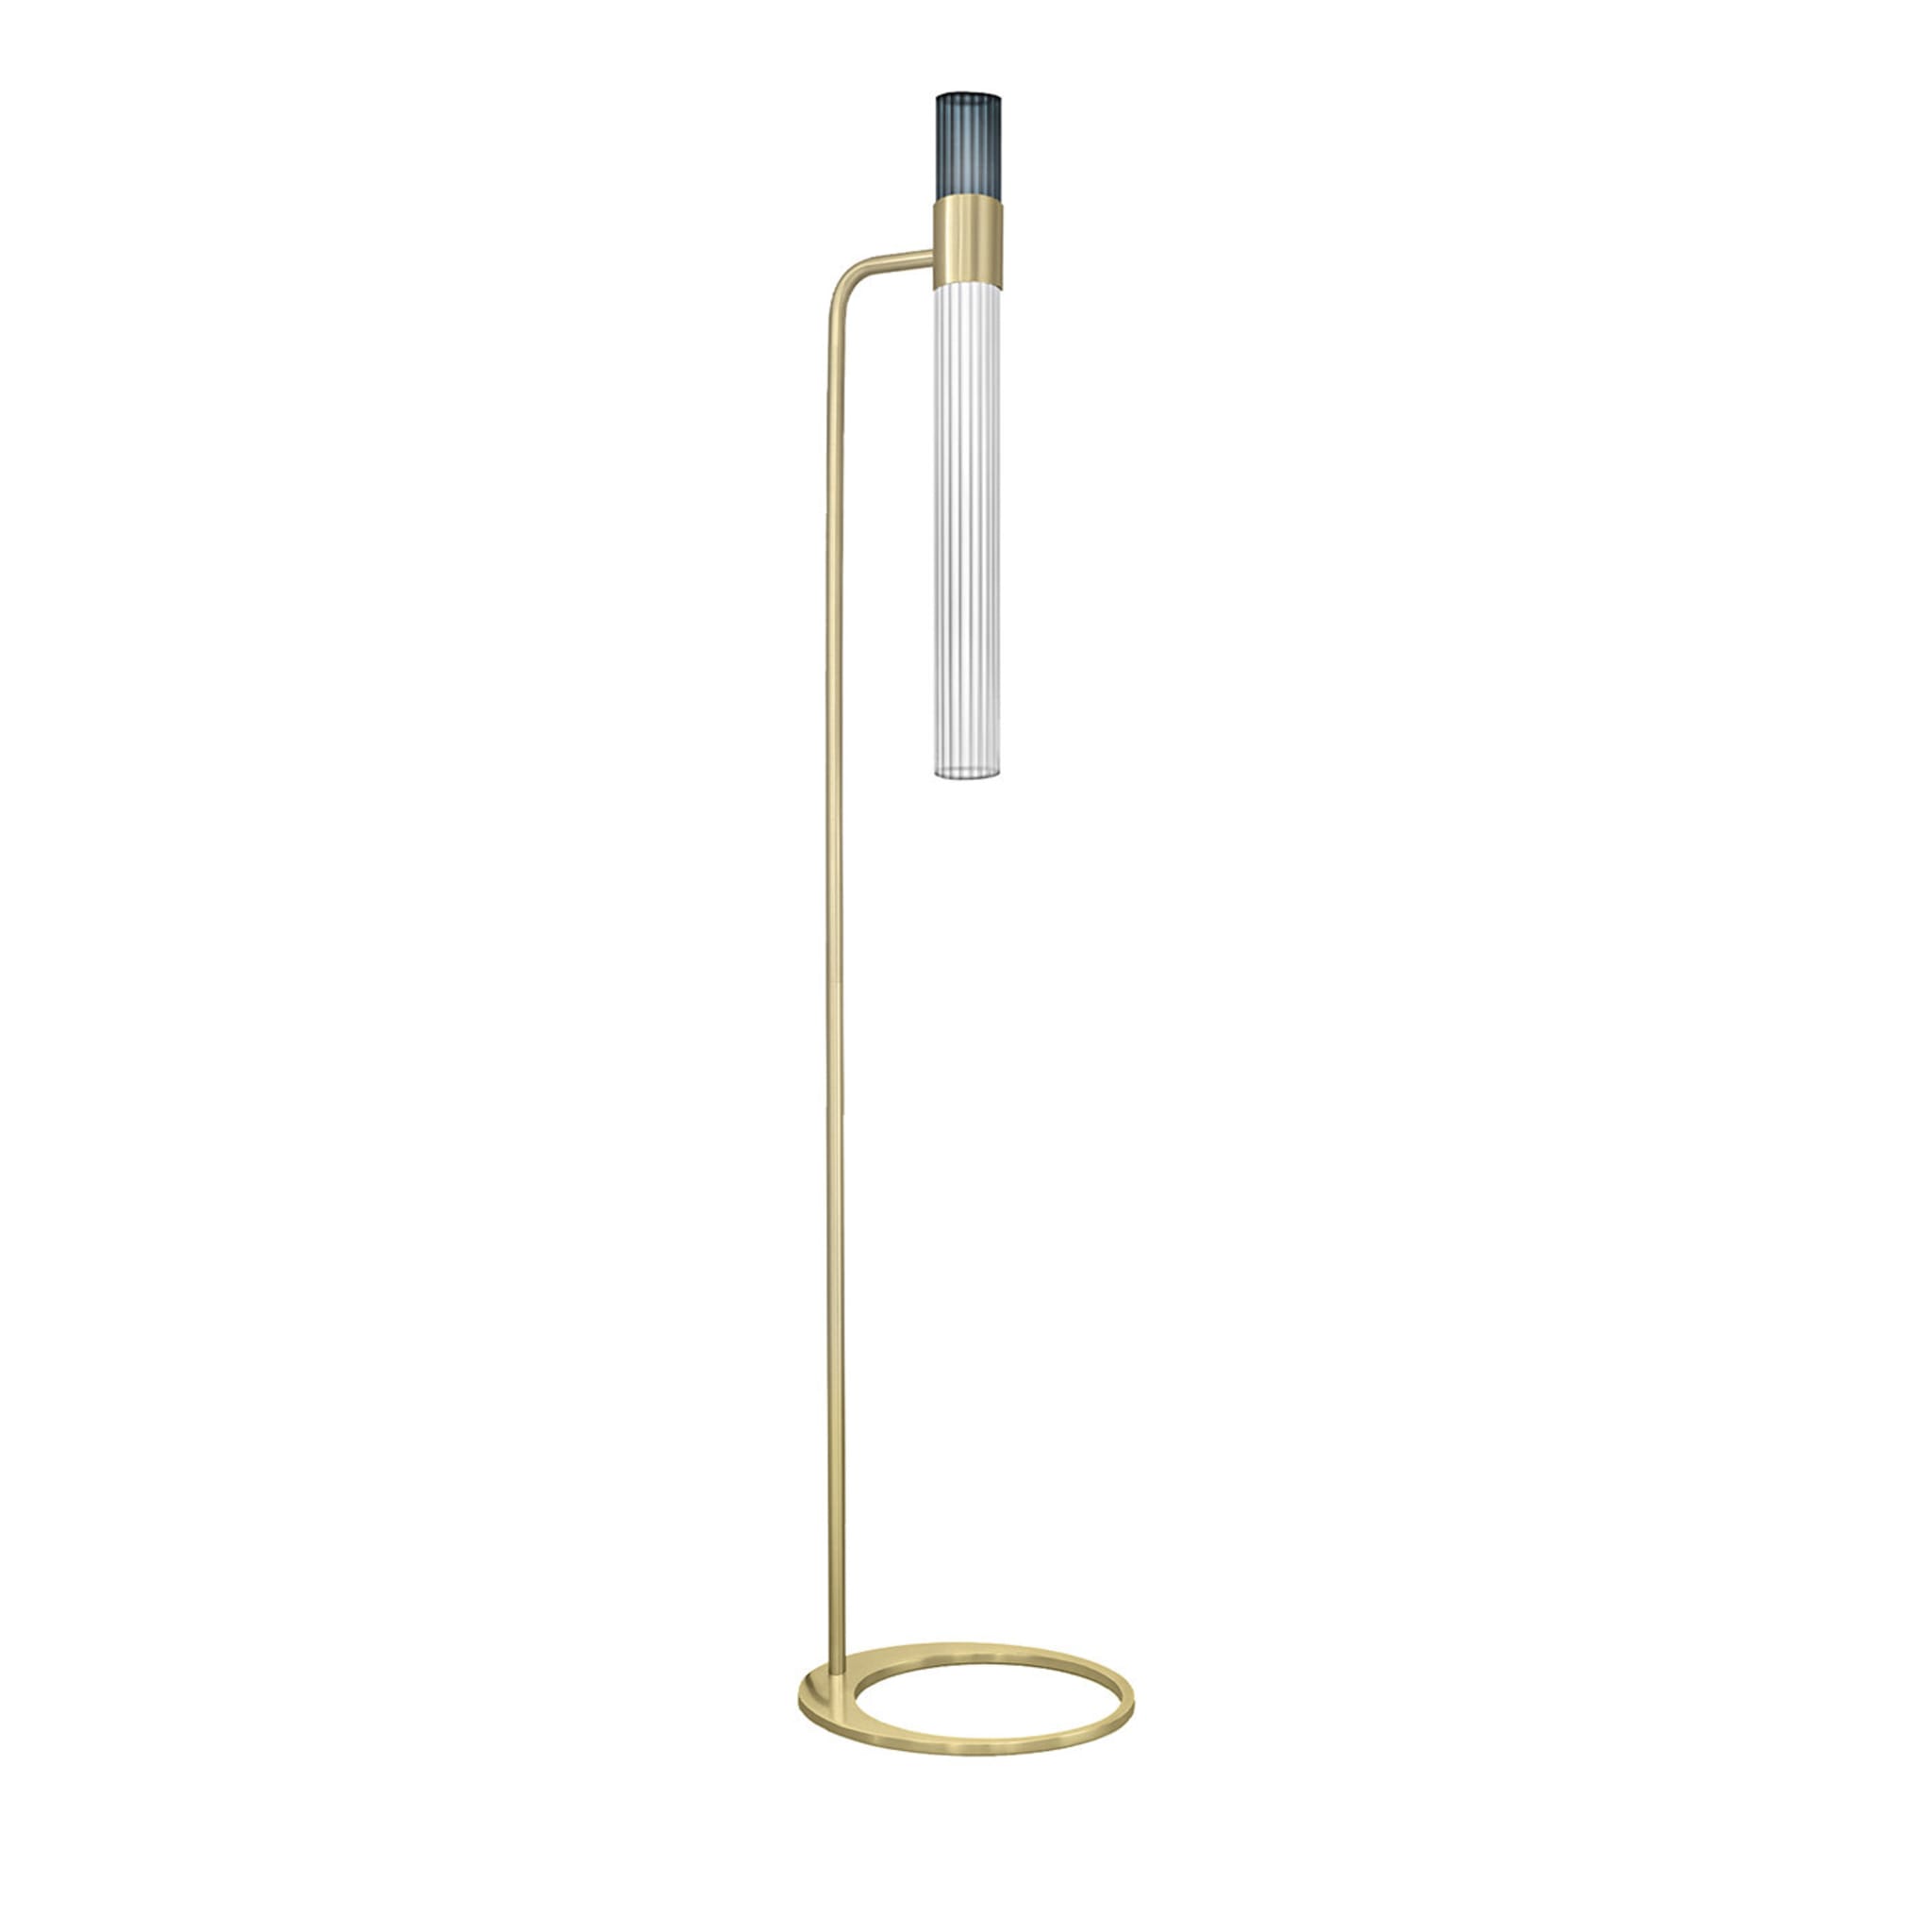 Sbarlusc Glass and Champagne Brass Floor Lamp by Isacco Brioschi - Main view